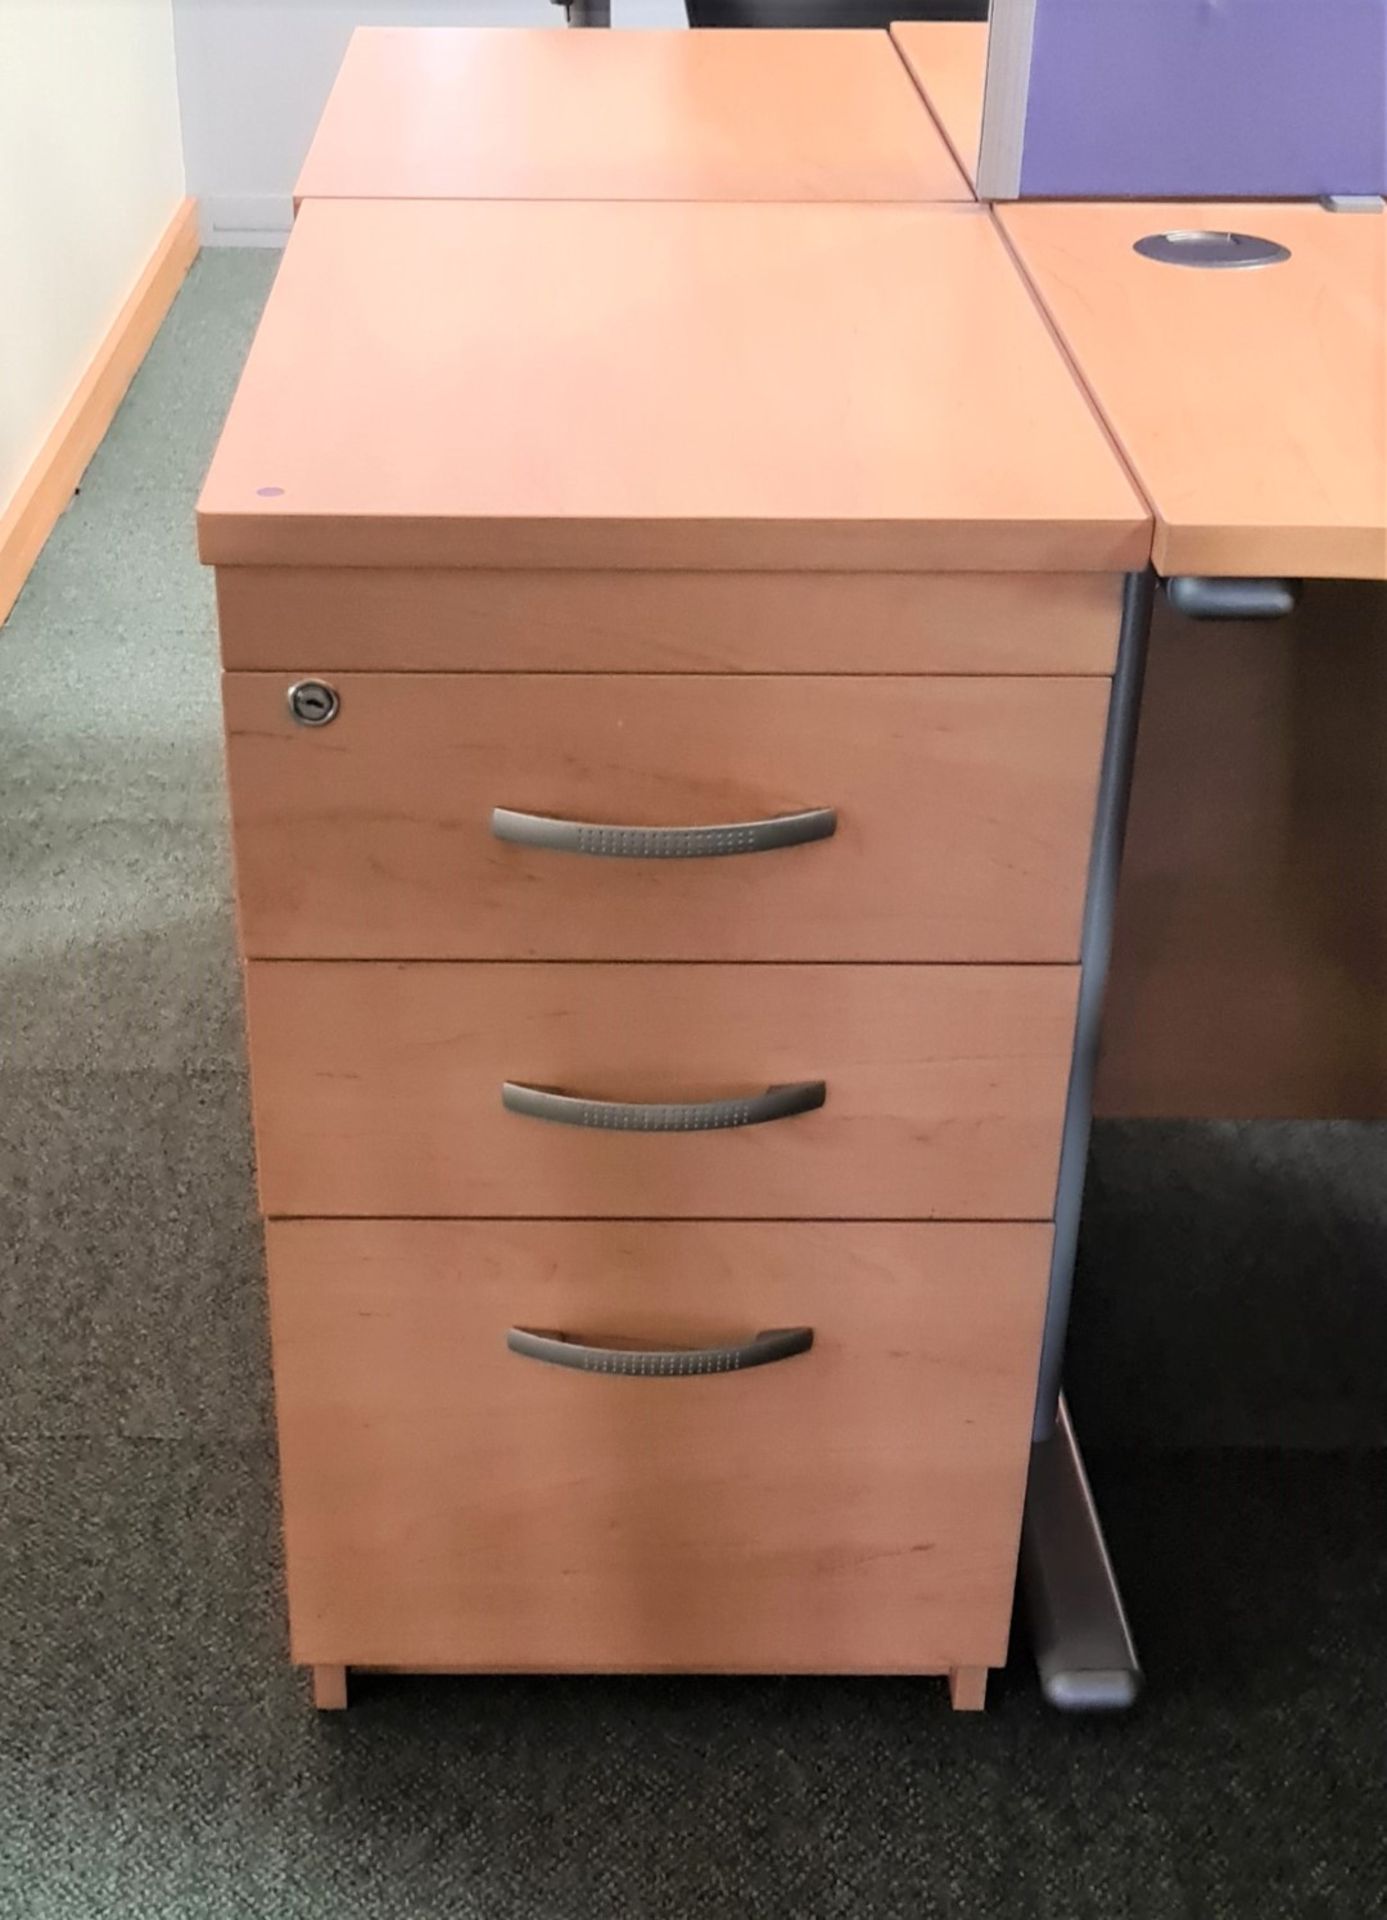 1 x Desk Height Three Drawer Pedestal With a Beech Finish - Ref: 1 x PK003 - Location: Site 2,